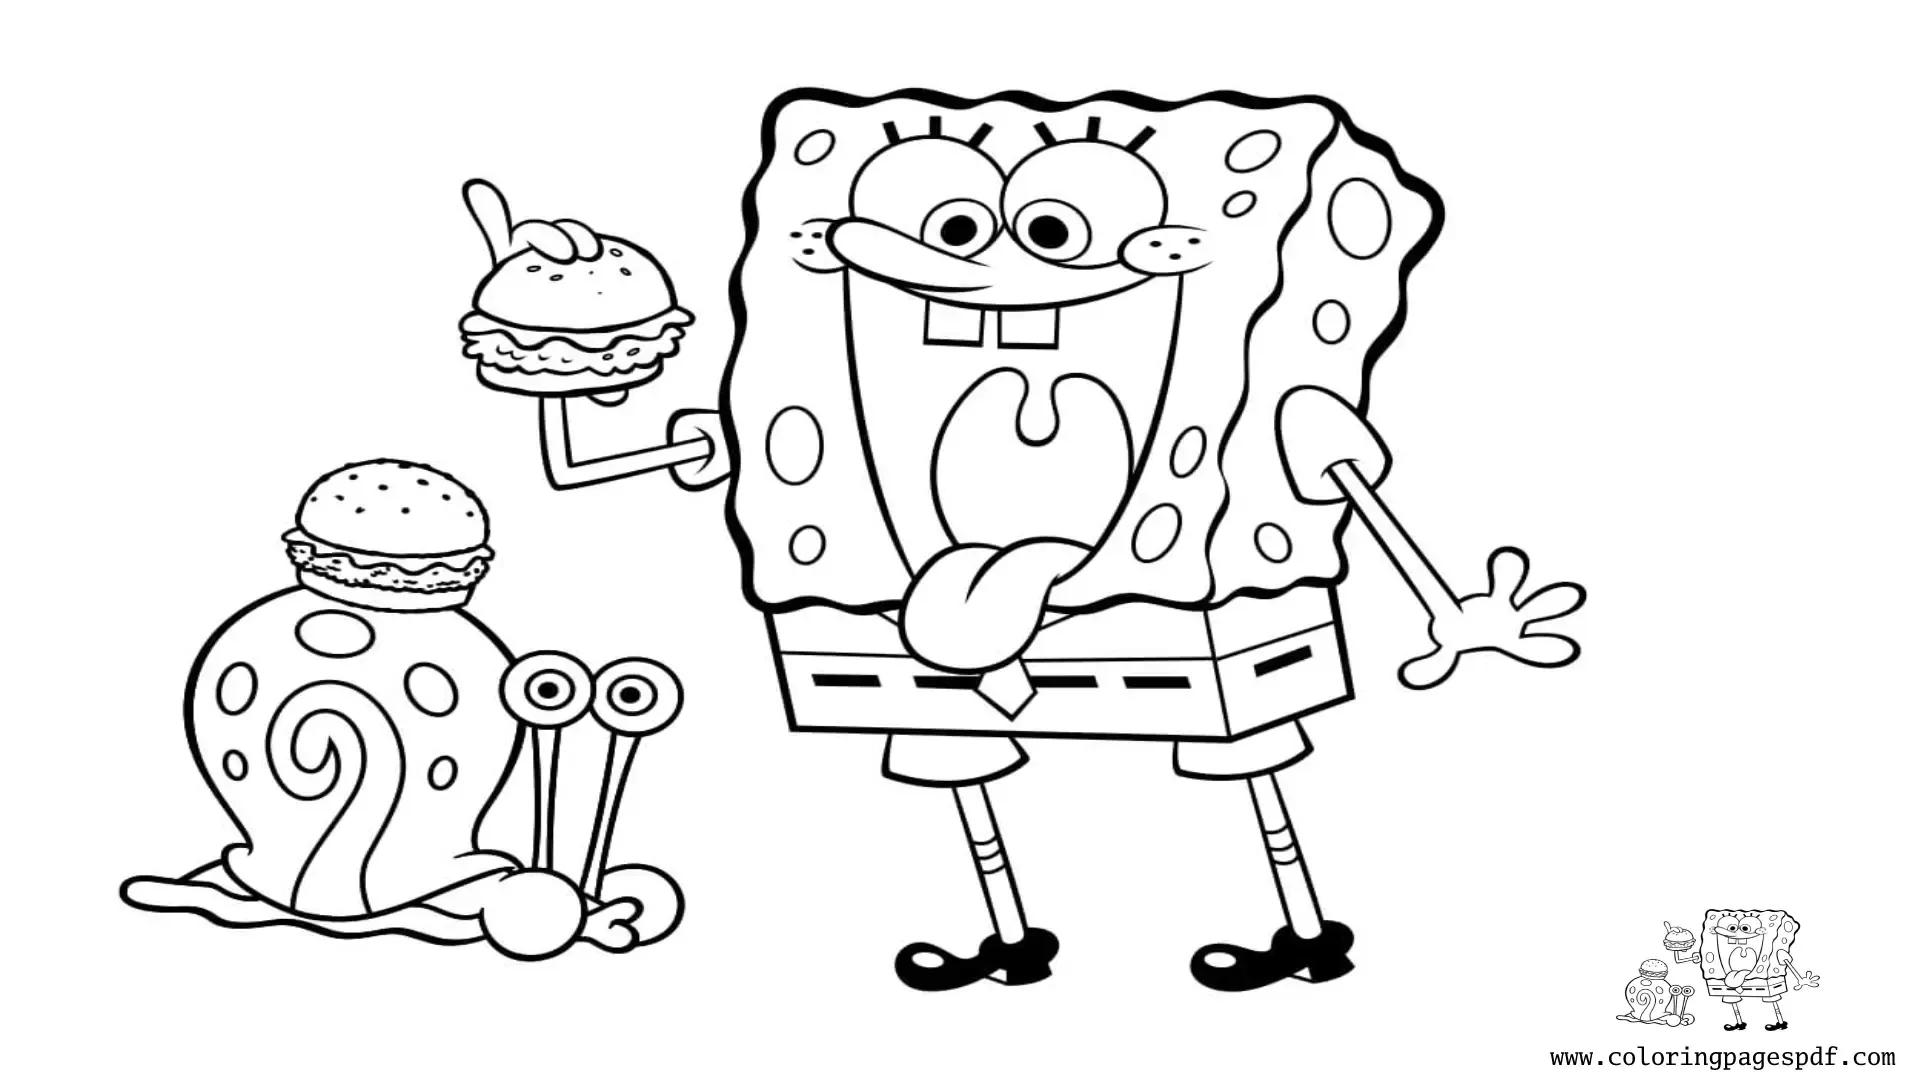 Coloring Pages Of SpongeBob And Gary Eating Krusty Krabs